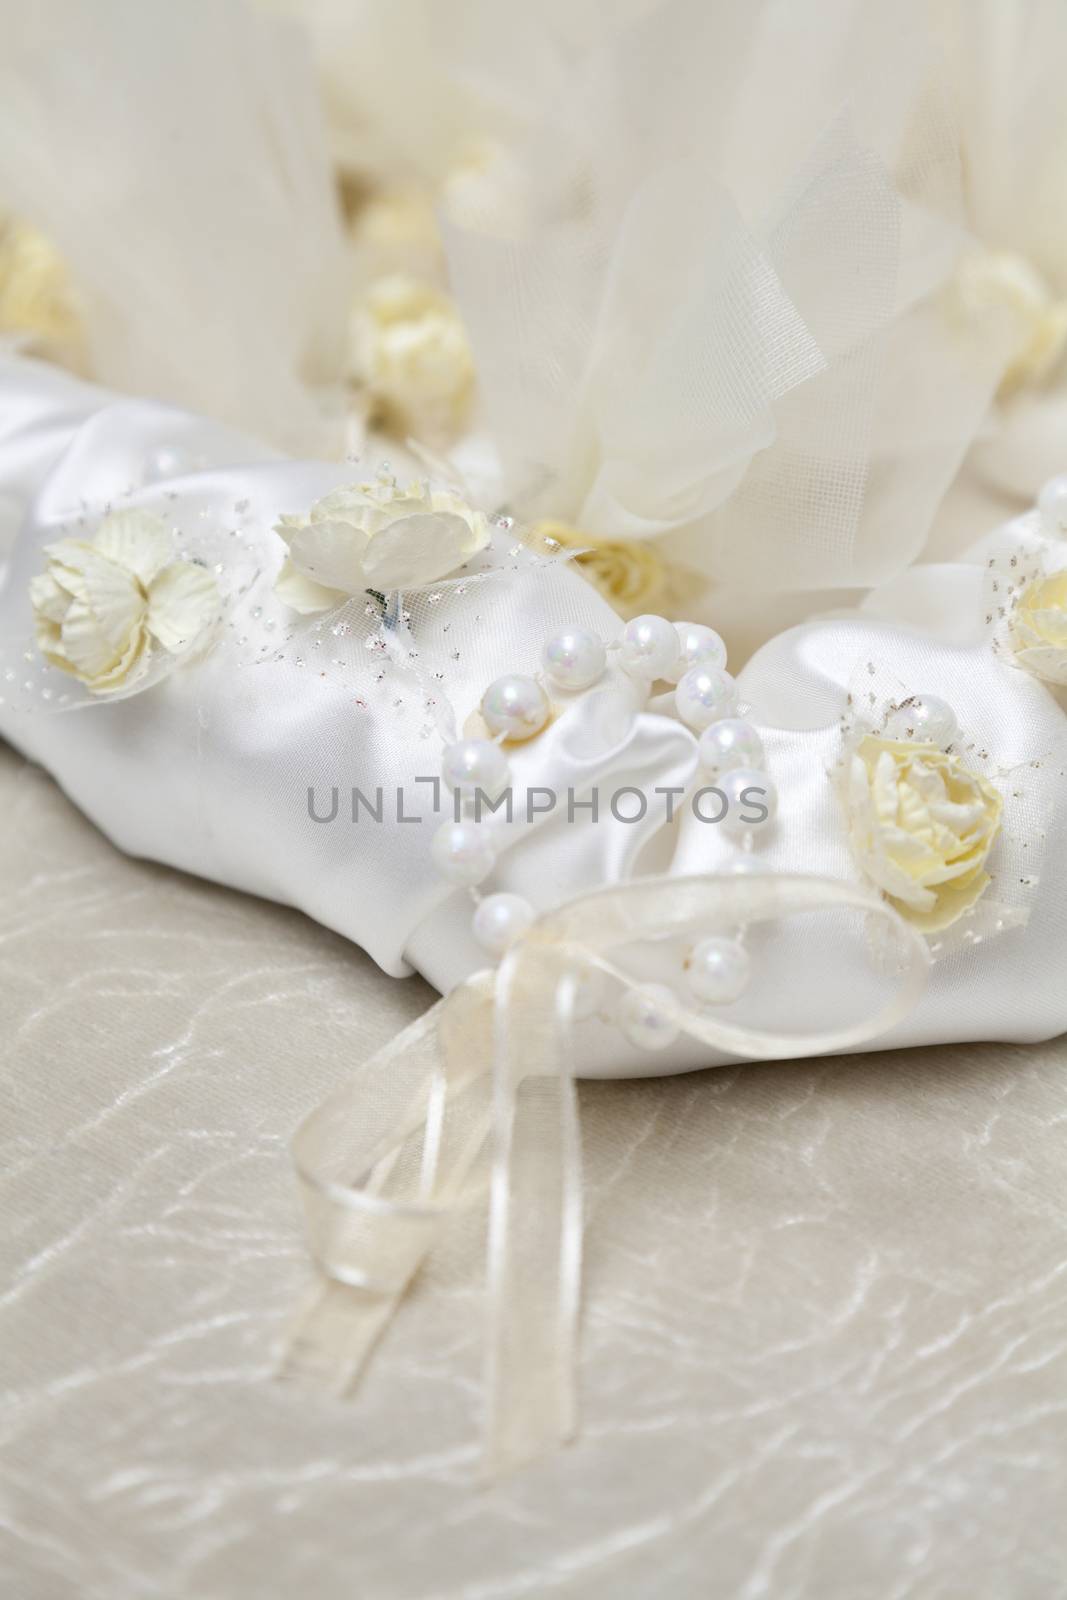 Elegant Wedding Favors decorated with artificial flowers